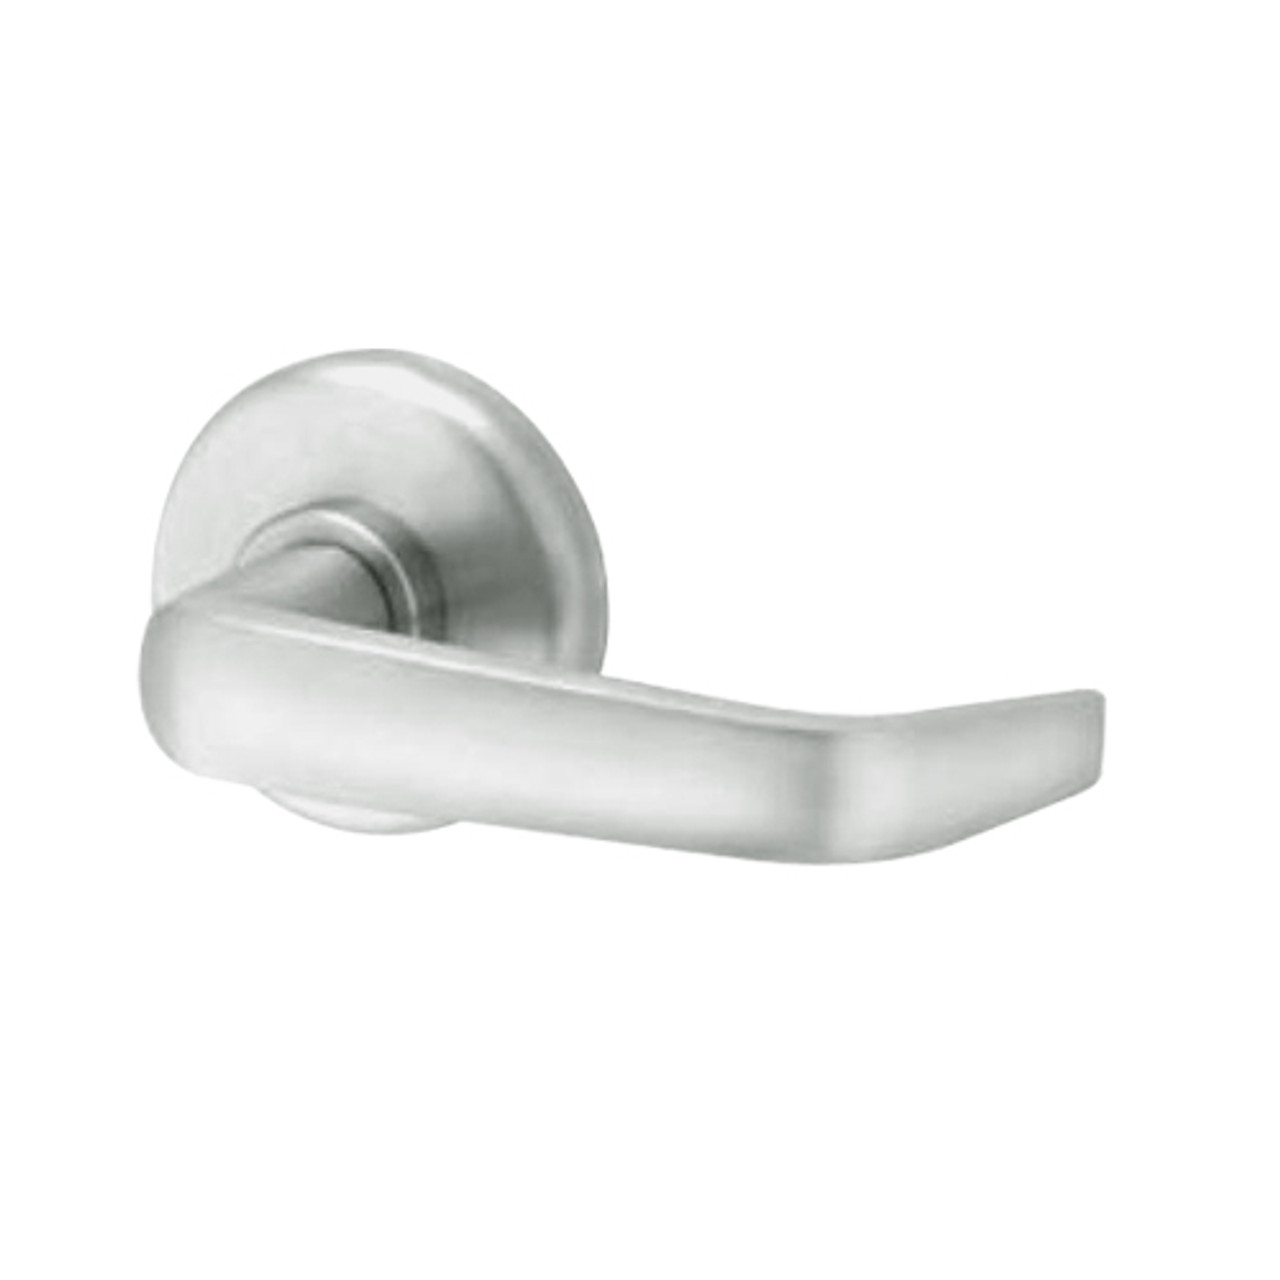 40HTKOS215S619 Best 40H Series Trim Kits Outside Lever w/ Cylinder with Contour w/ Angle Return Style in Satin Nickel